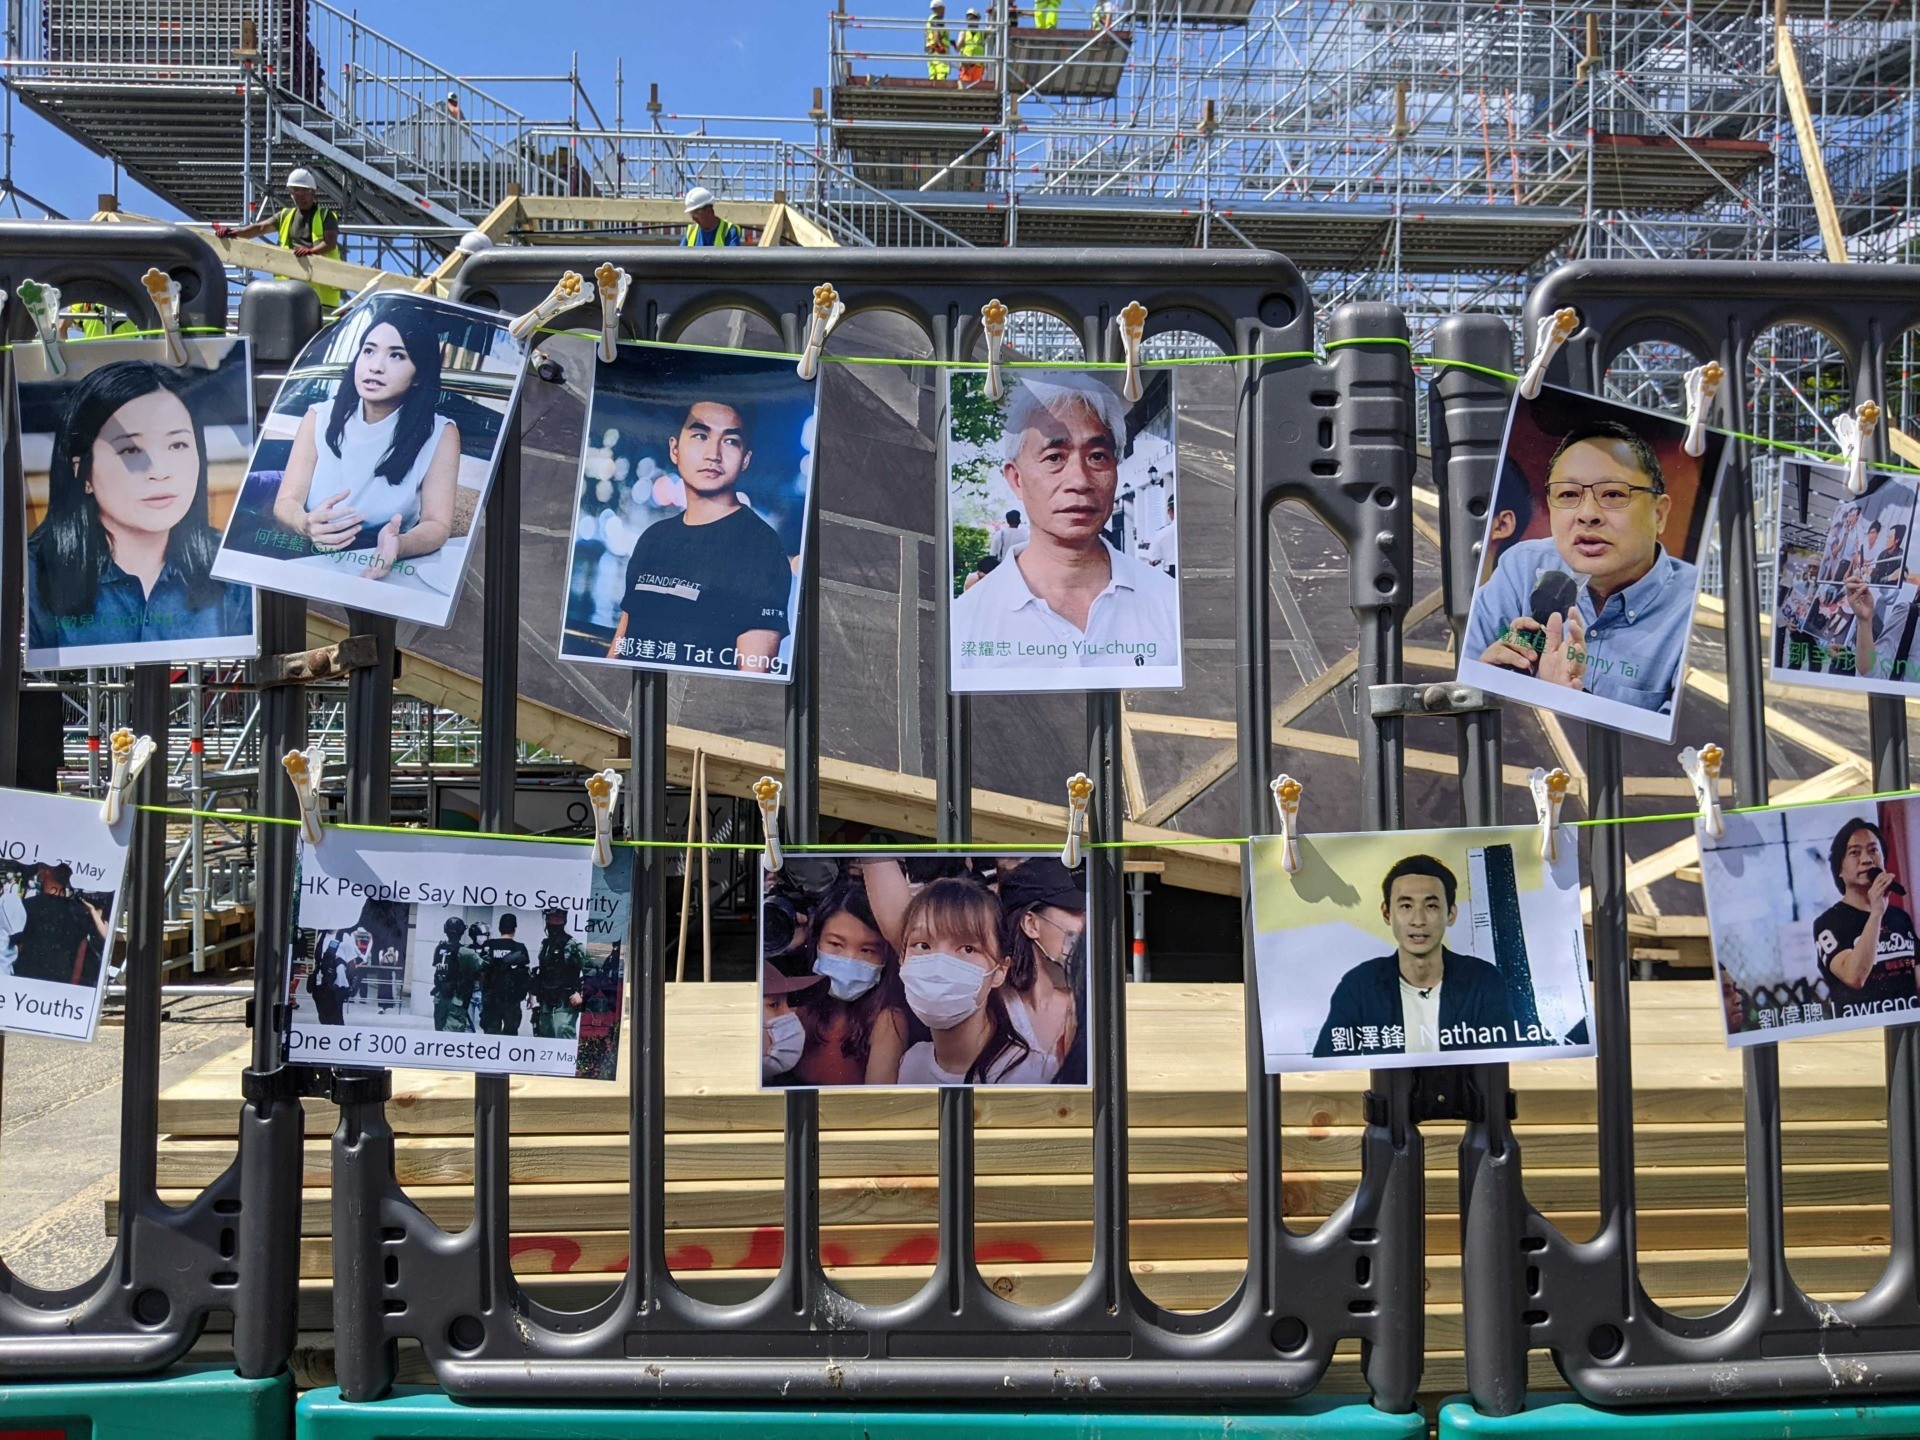 Hong Kong protesters hung pictures of pro-democracy activists who have been targeted by the Chinese Communist Party at a demonstration in London. June 12th, 2021. Kurt Zindulka, Breitbart News